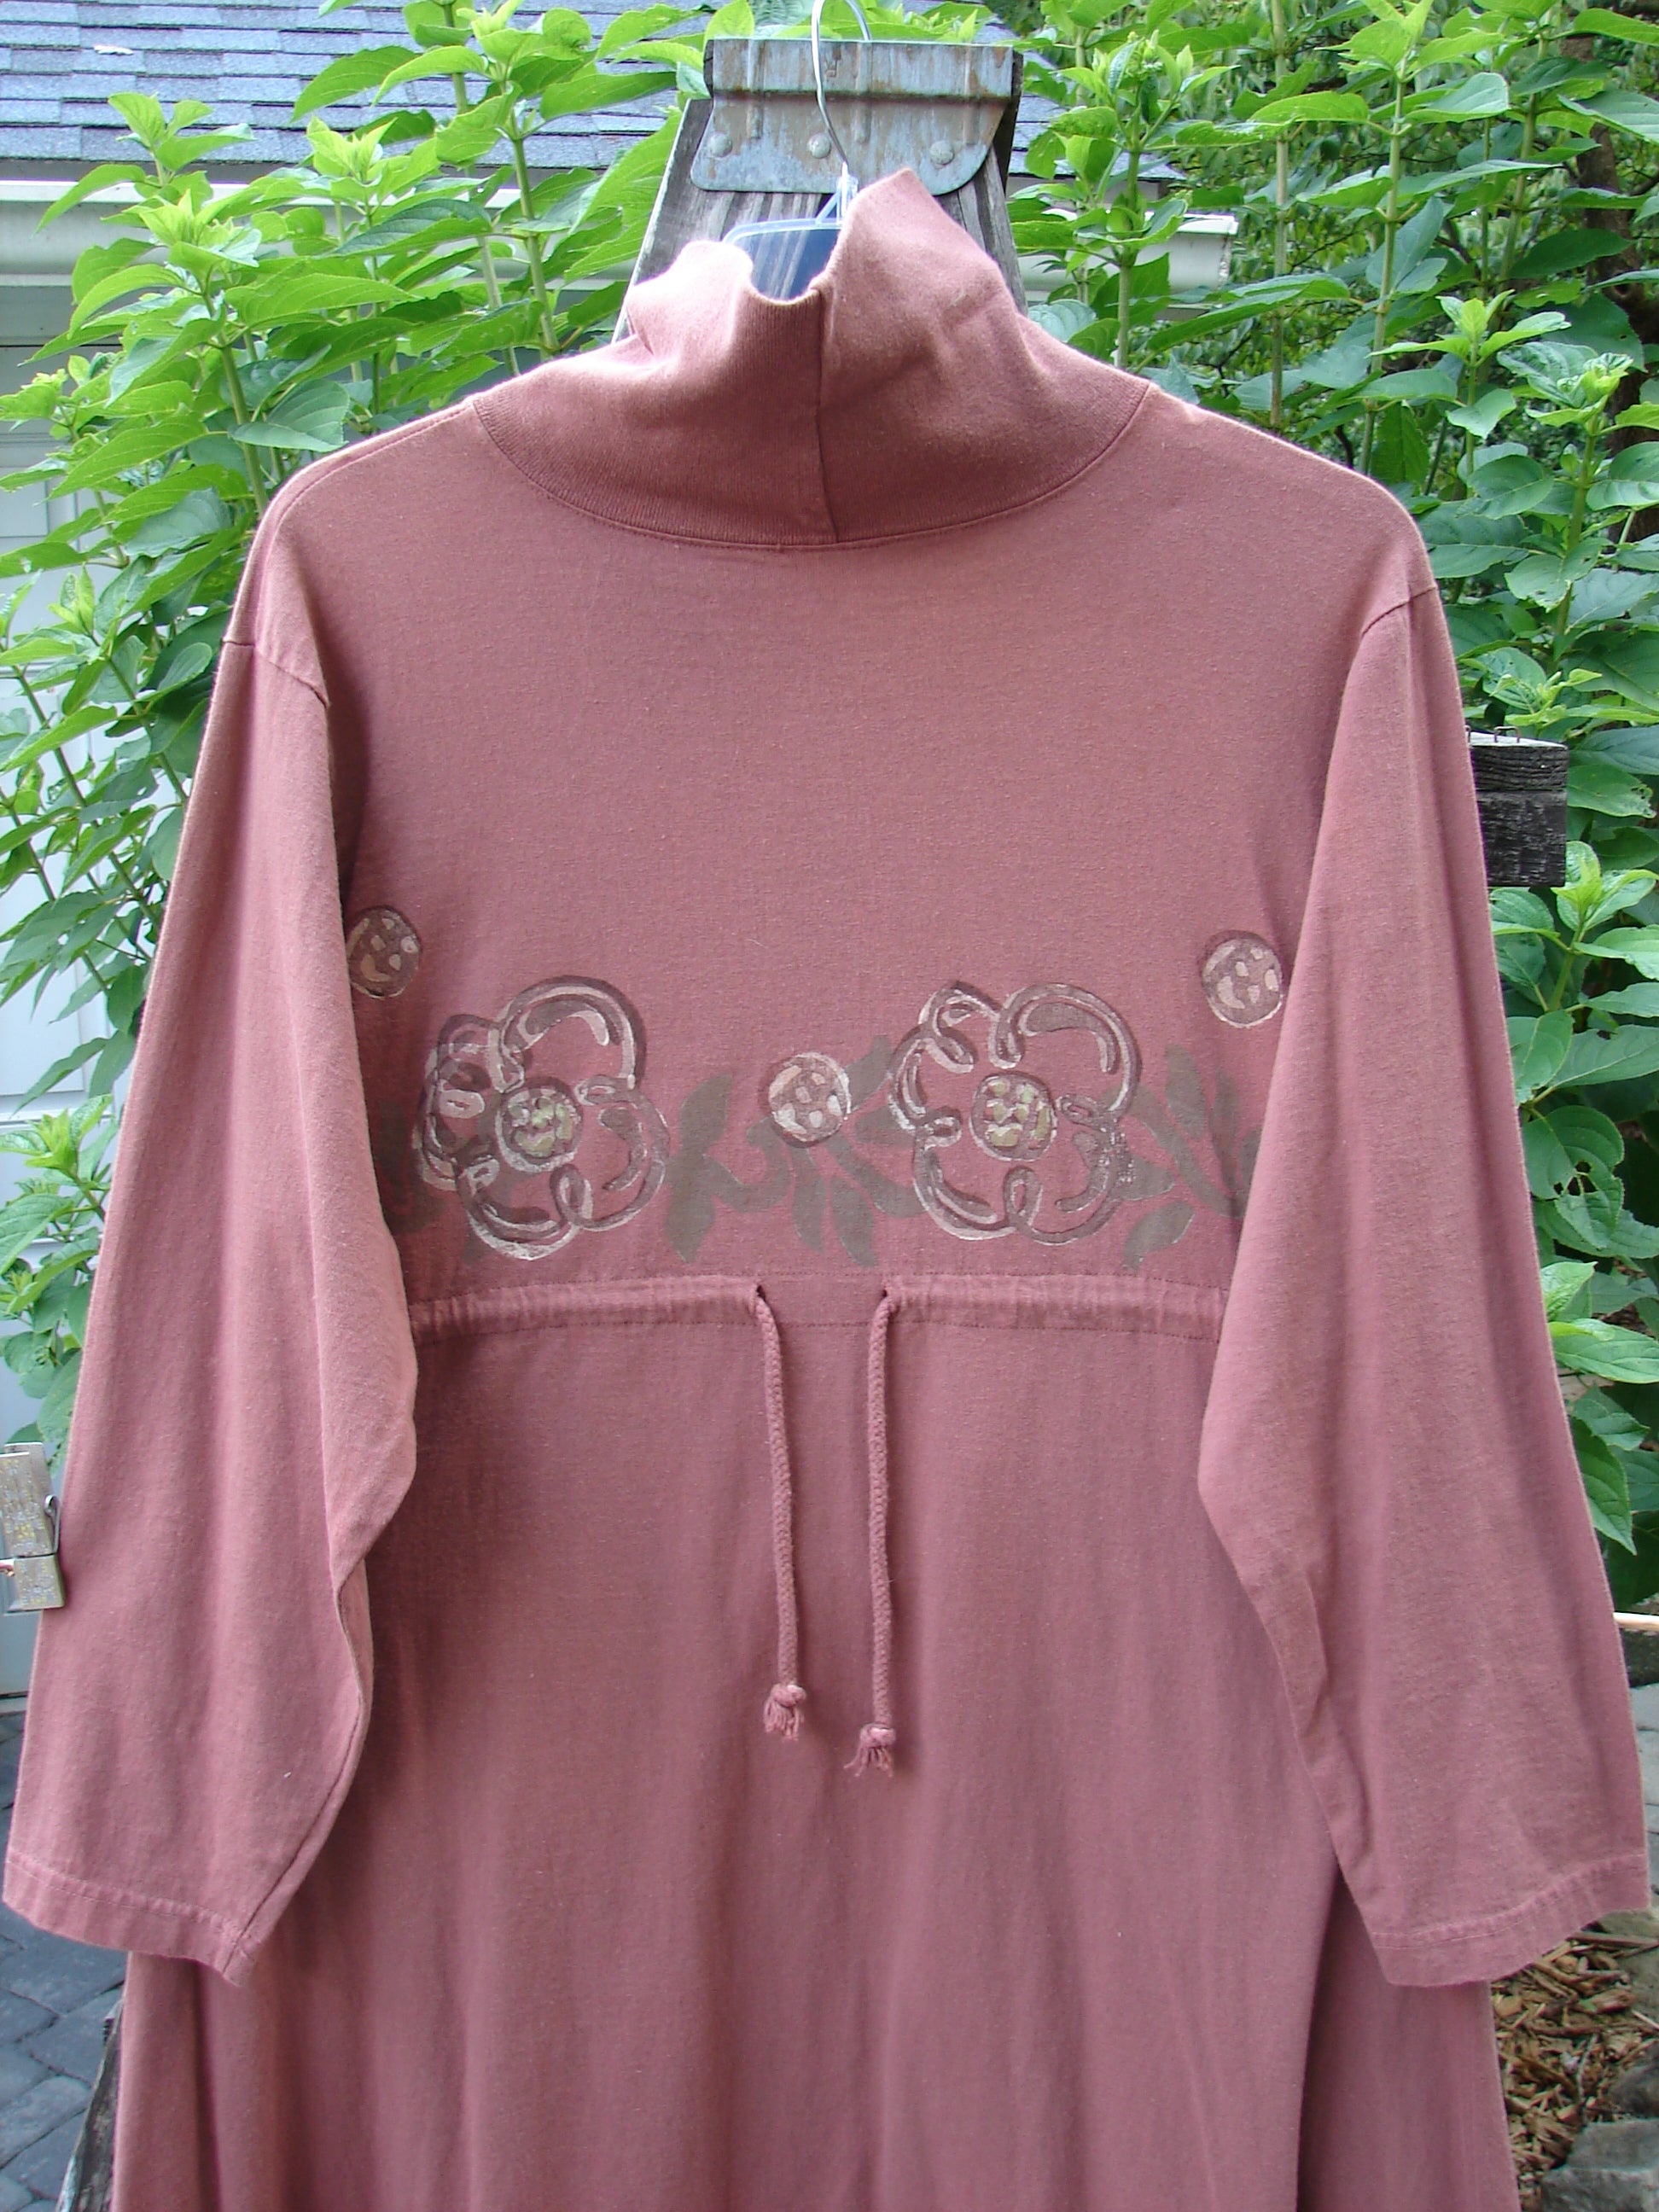 Alt text: 1995 Omega Dress Celestial Garden Altered Clove Size 1, featuring a pink shirt with a flower design, heavy ribbed turtleneck, drop shoulders, and drawcord backline.